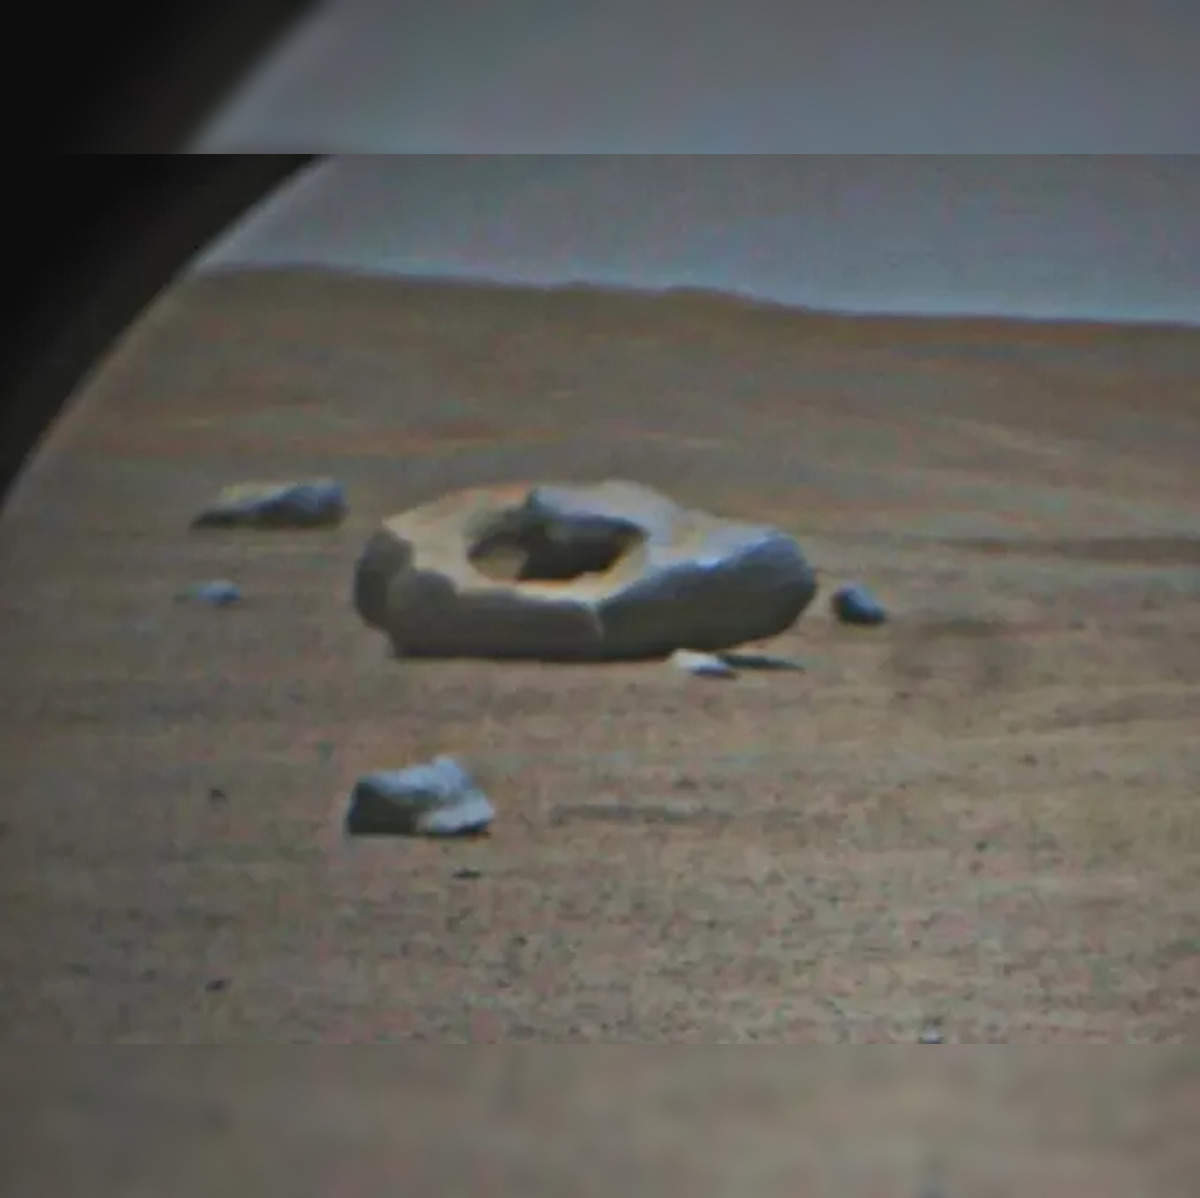 NASA's Perseverance Rover Captures Donut-Shaped Rock On Mars